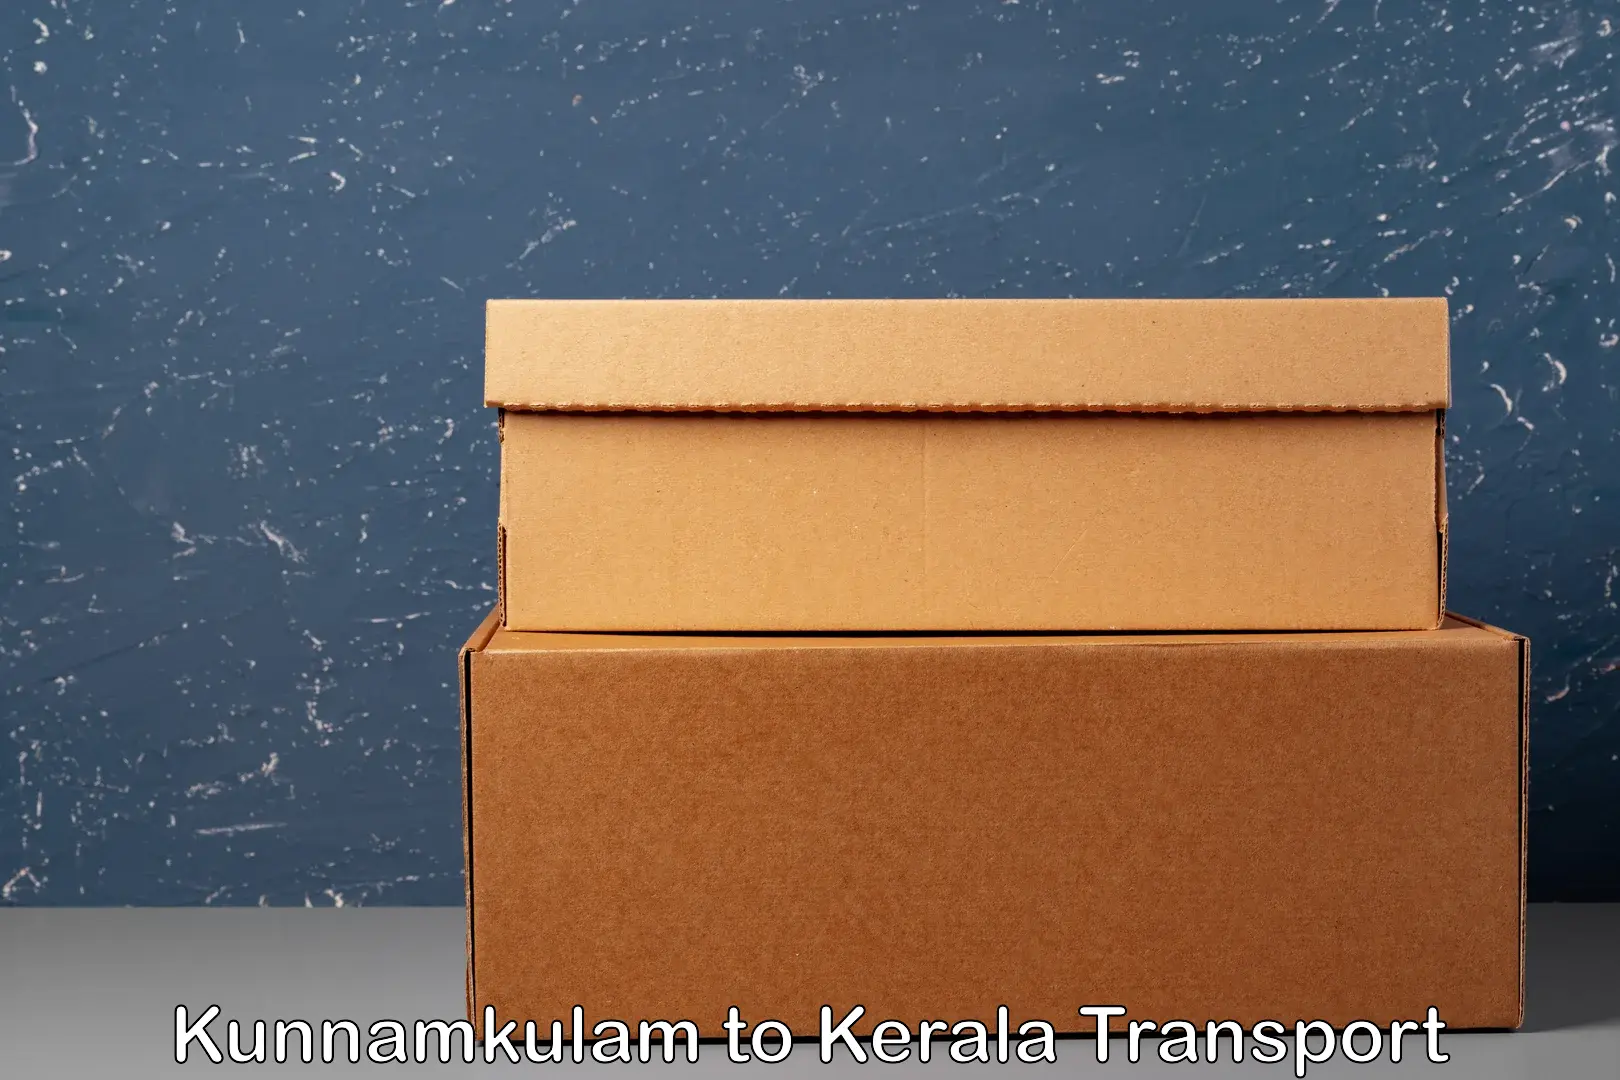 Nationwide transport services Kunnamkulam to Cochin